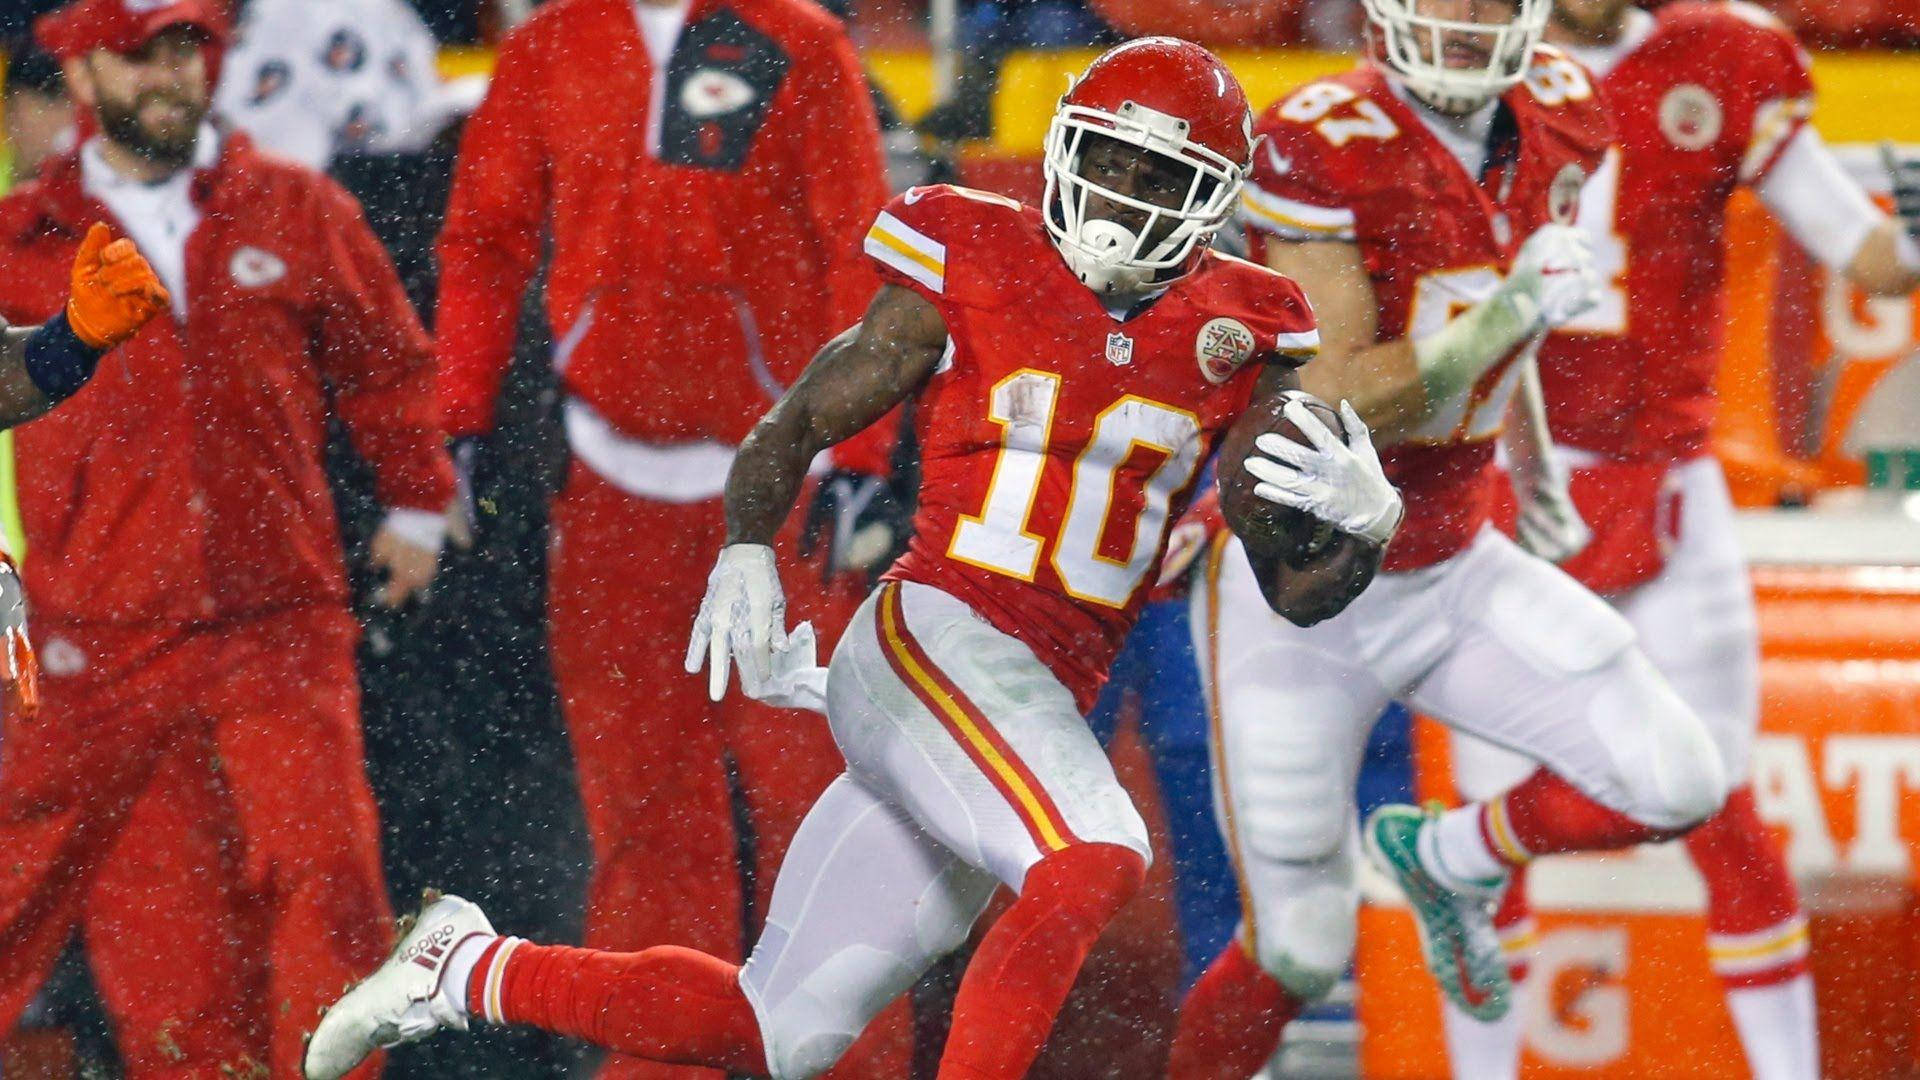 Tyreek Hill In Action - Speed And Agility On Display Background